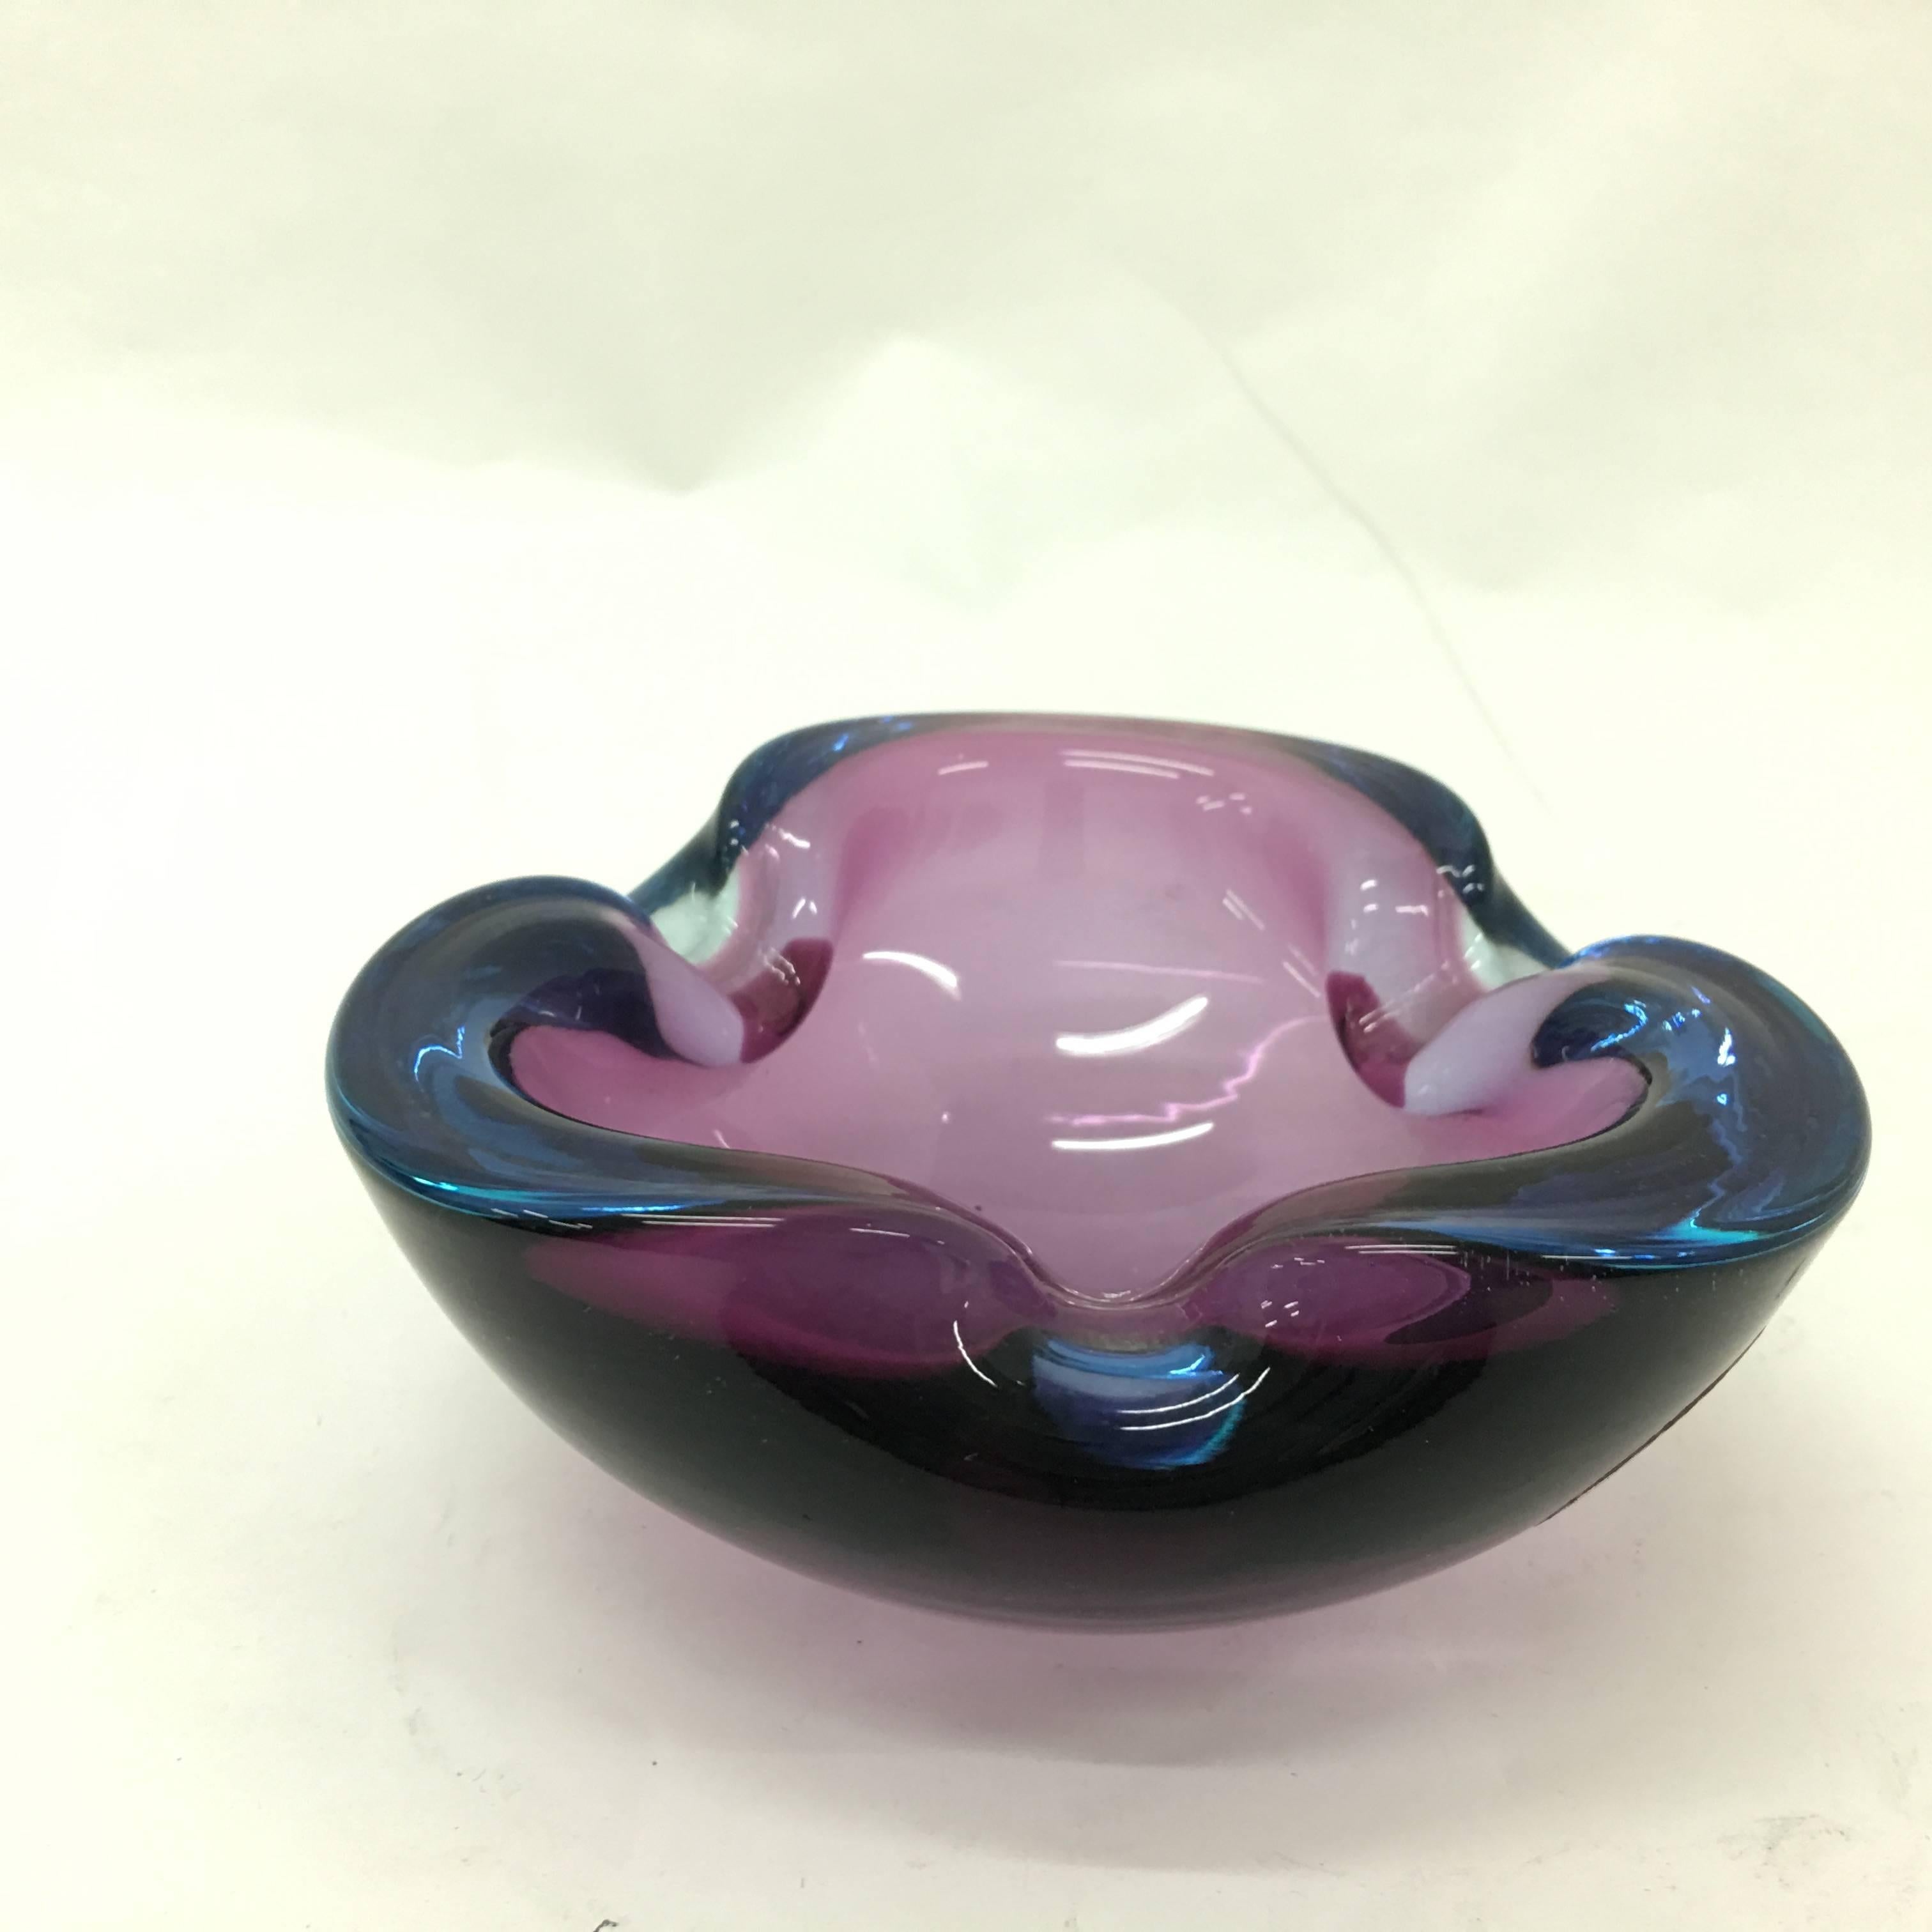 It's a purple and blue Murano glass ashtray made in Italy in the 1970s.